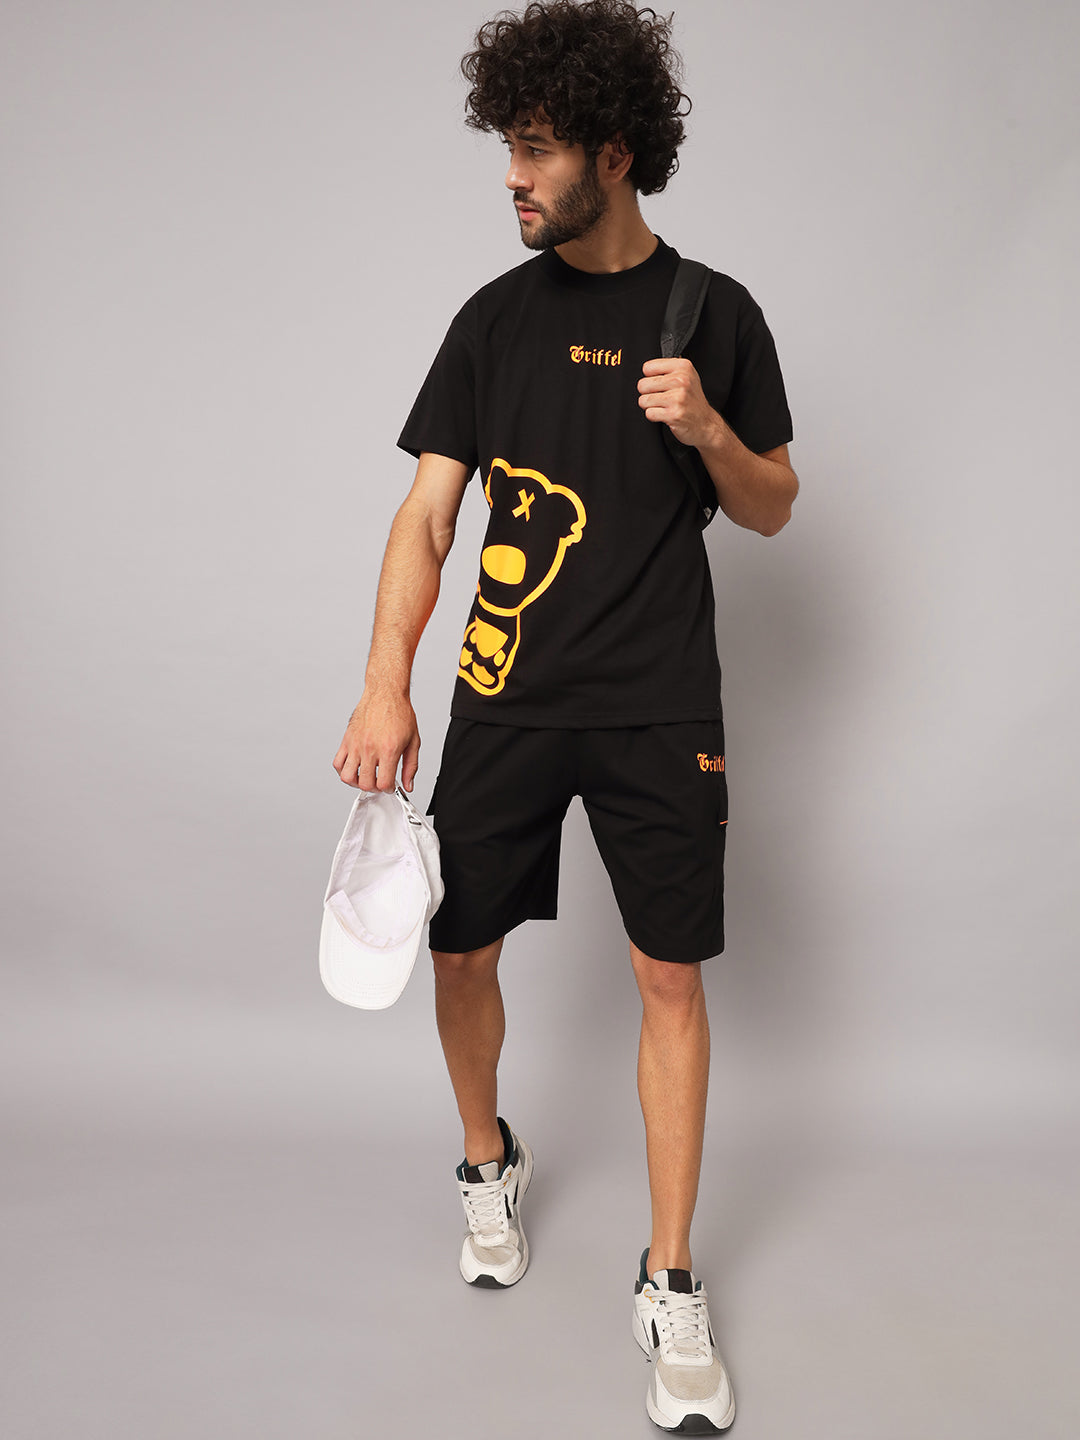 GRIFFEL Men Printed Black Loose fit T-shirt and Shorts Set - griffel